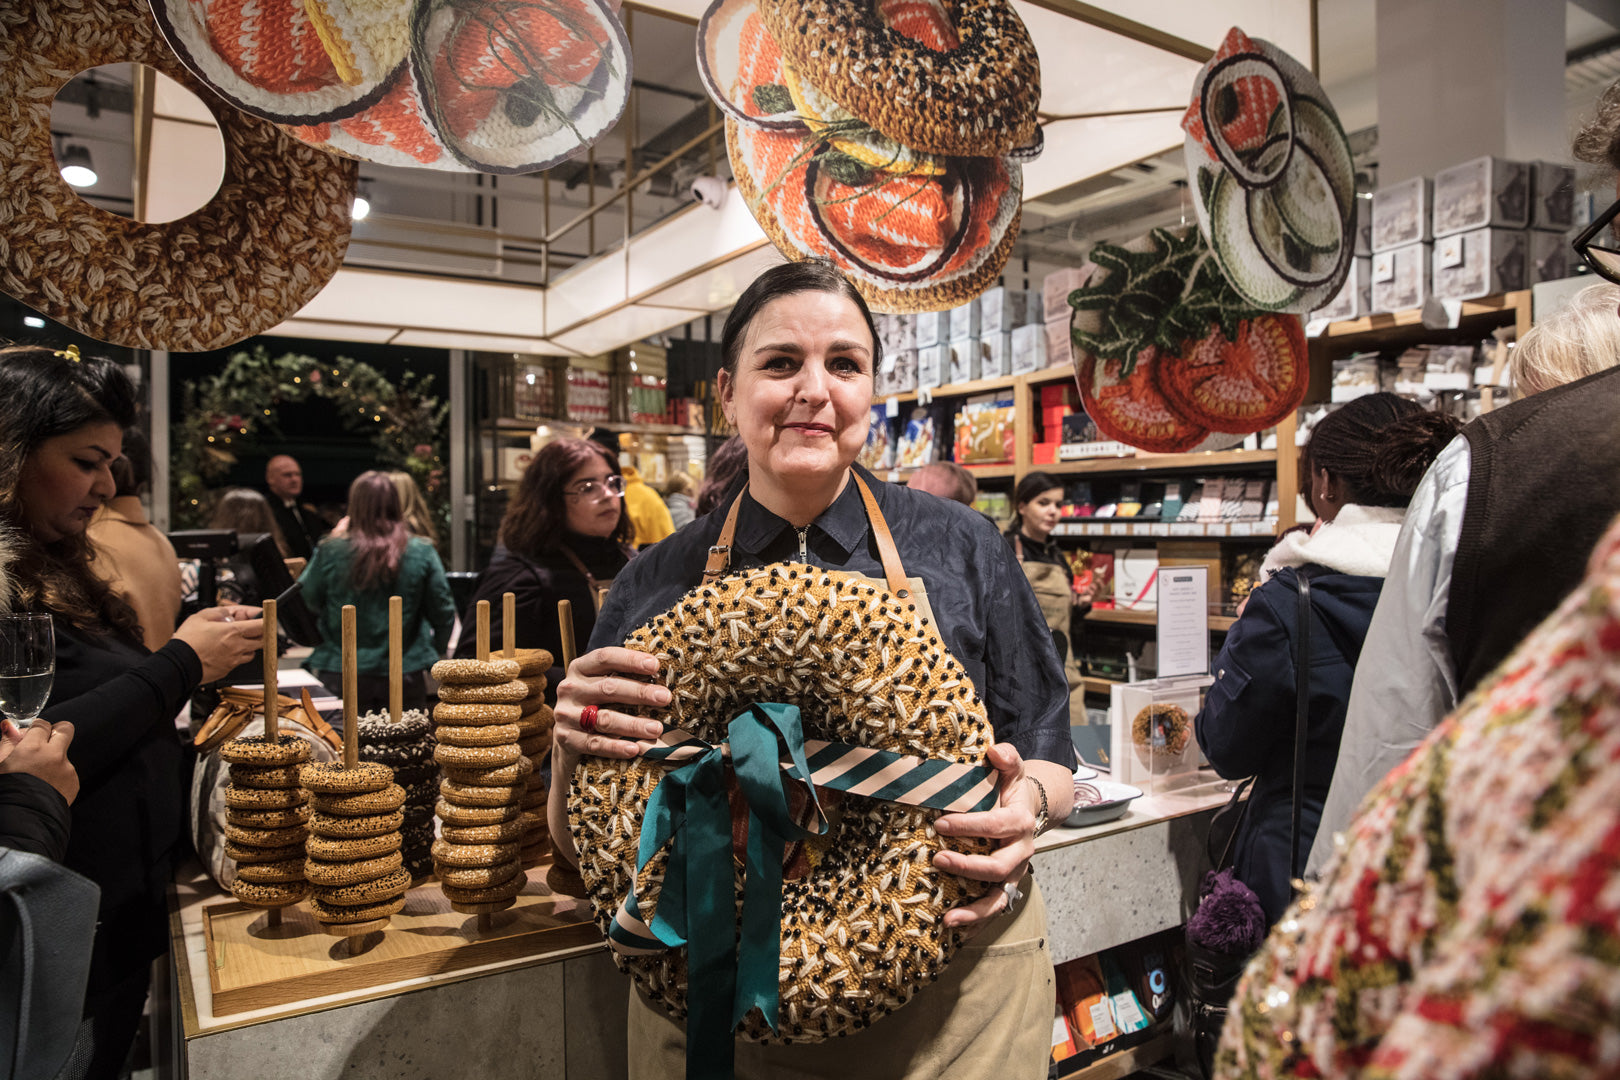 An artist: Kate Jenkins, proudly presents her handcrafted wreath that looks like pretzels at an exhibition, with large knit fruit decorations overhead, showcasing a festive and creative atmosphere.